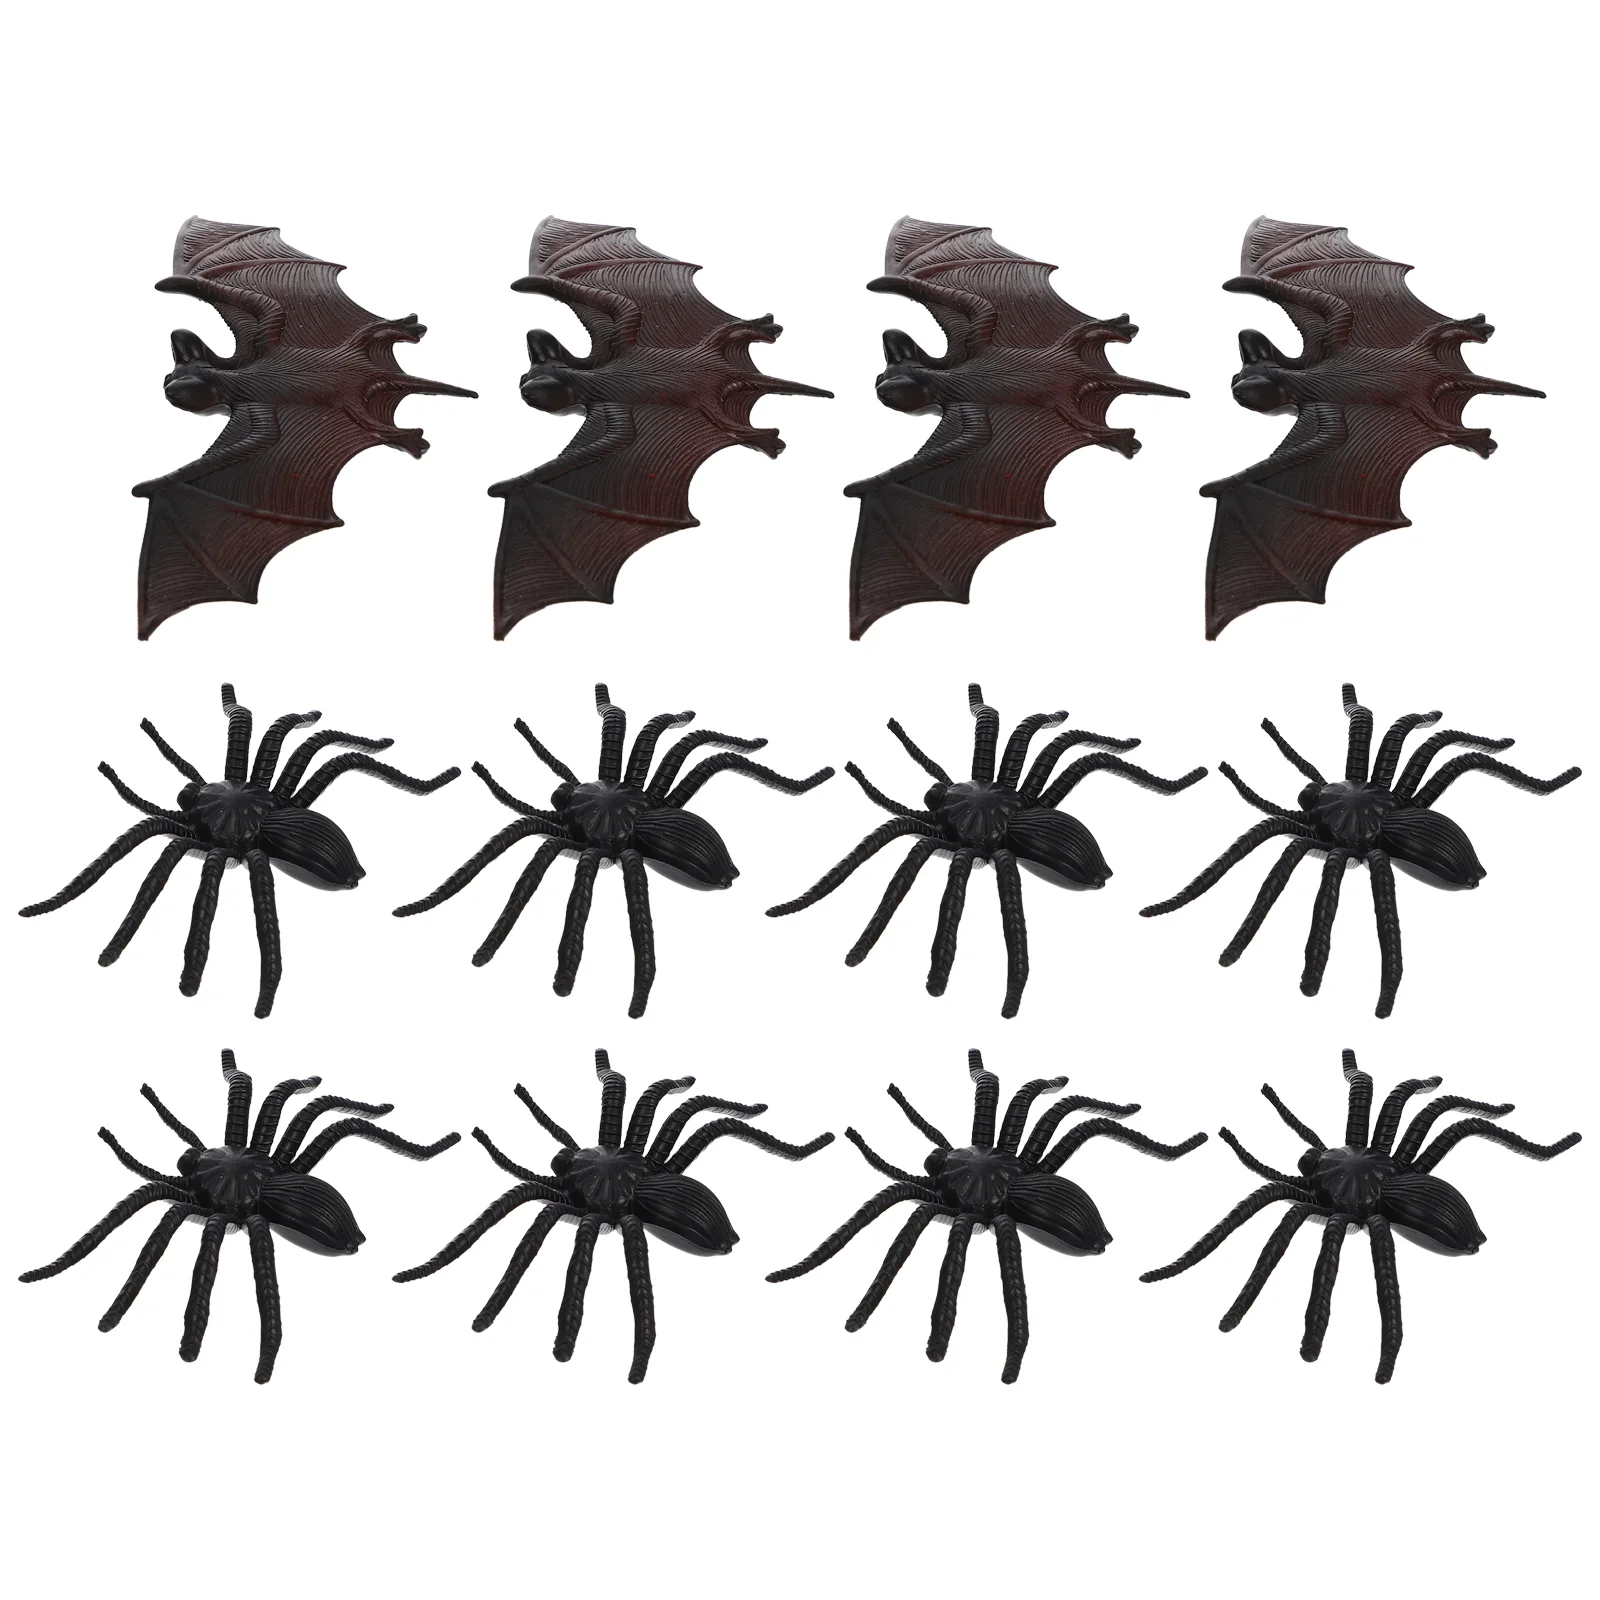 

Spiders Spider Batsbat Prank Props Fakeplastic Insect Realistic Prop Simulation Small Scary Trick Terror Treat 3D Decor Or